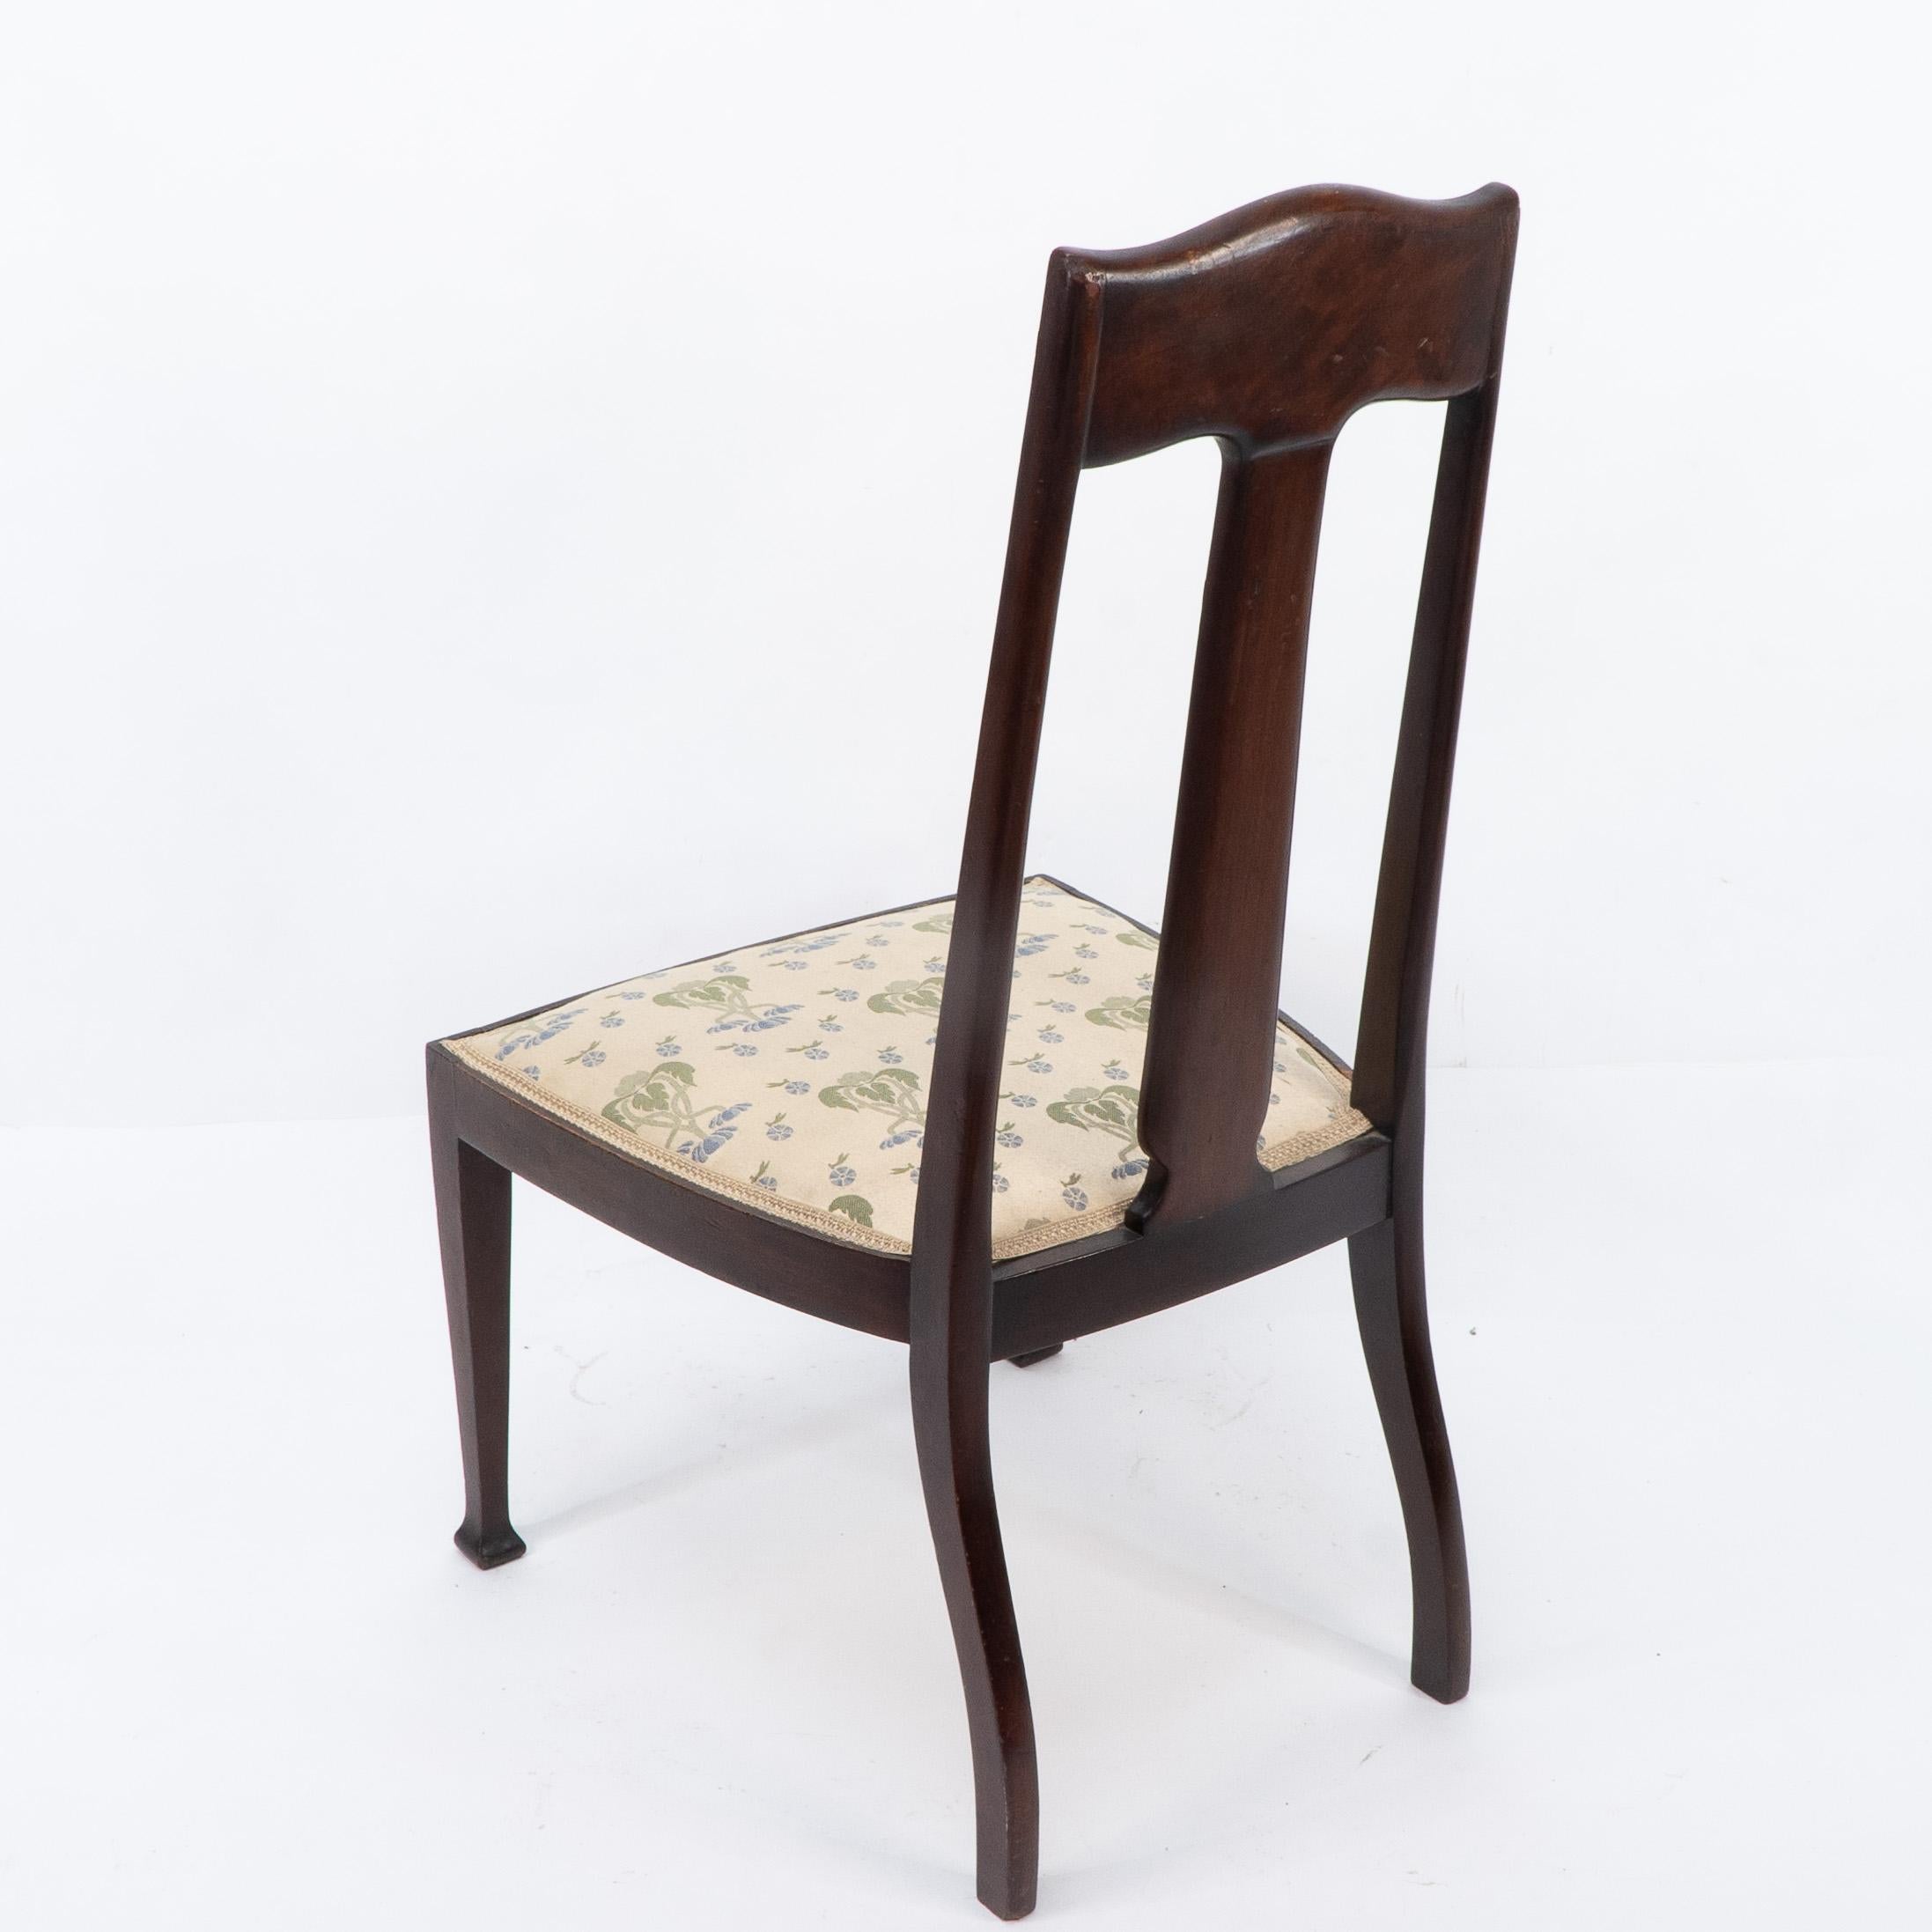 Jas Shoolbred. Arts & Crafts Mahogany Rosewood Chair With stylized Floral Inlay For Sale 4